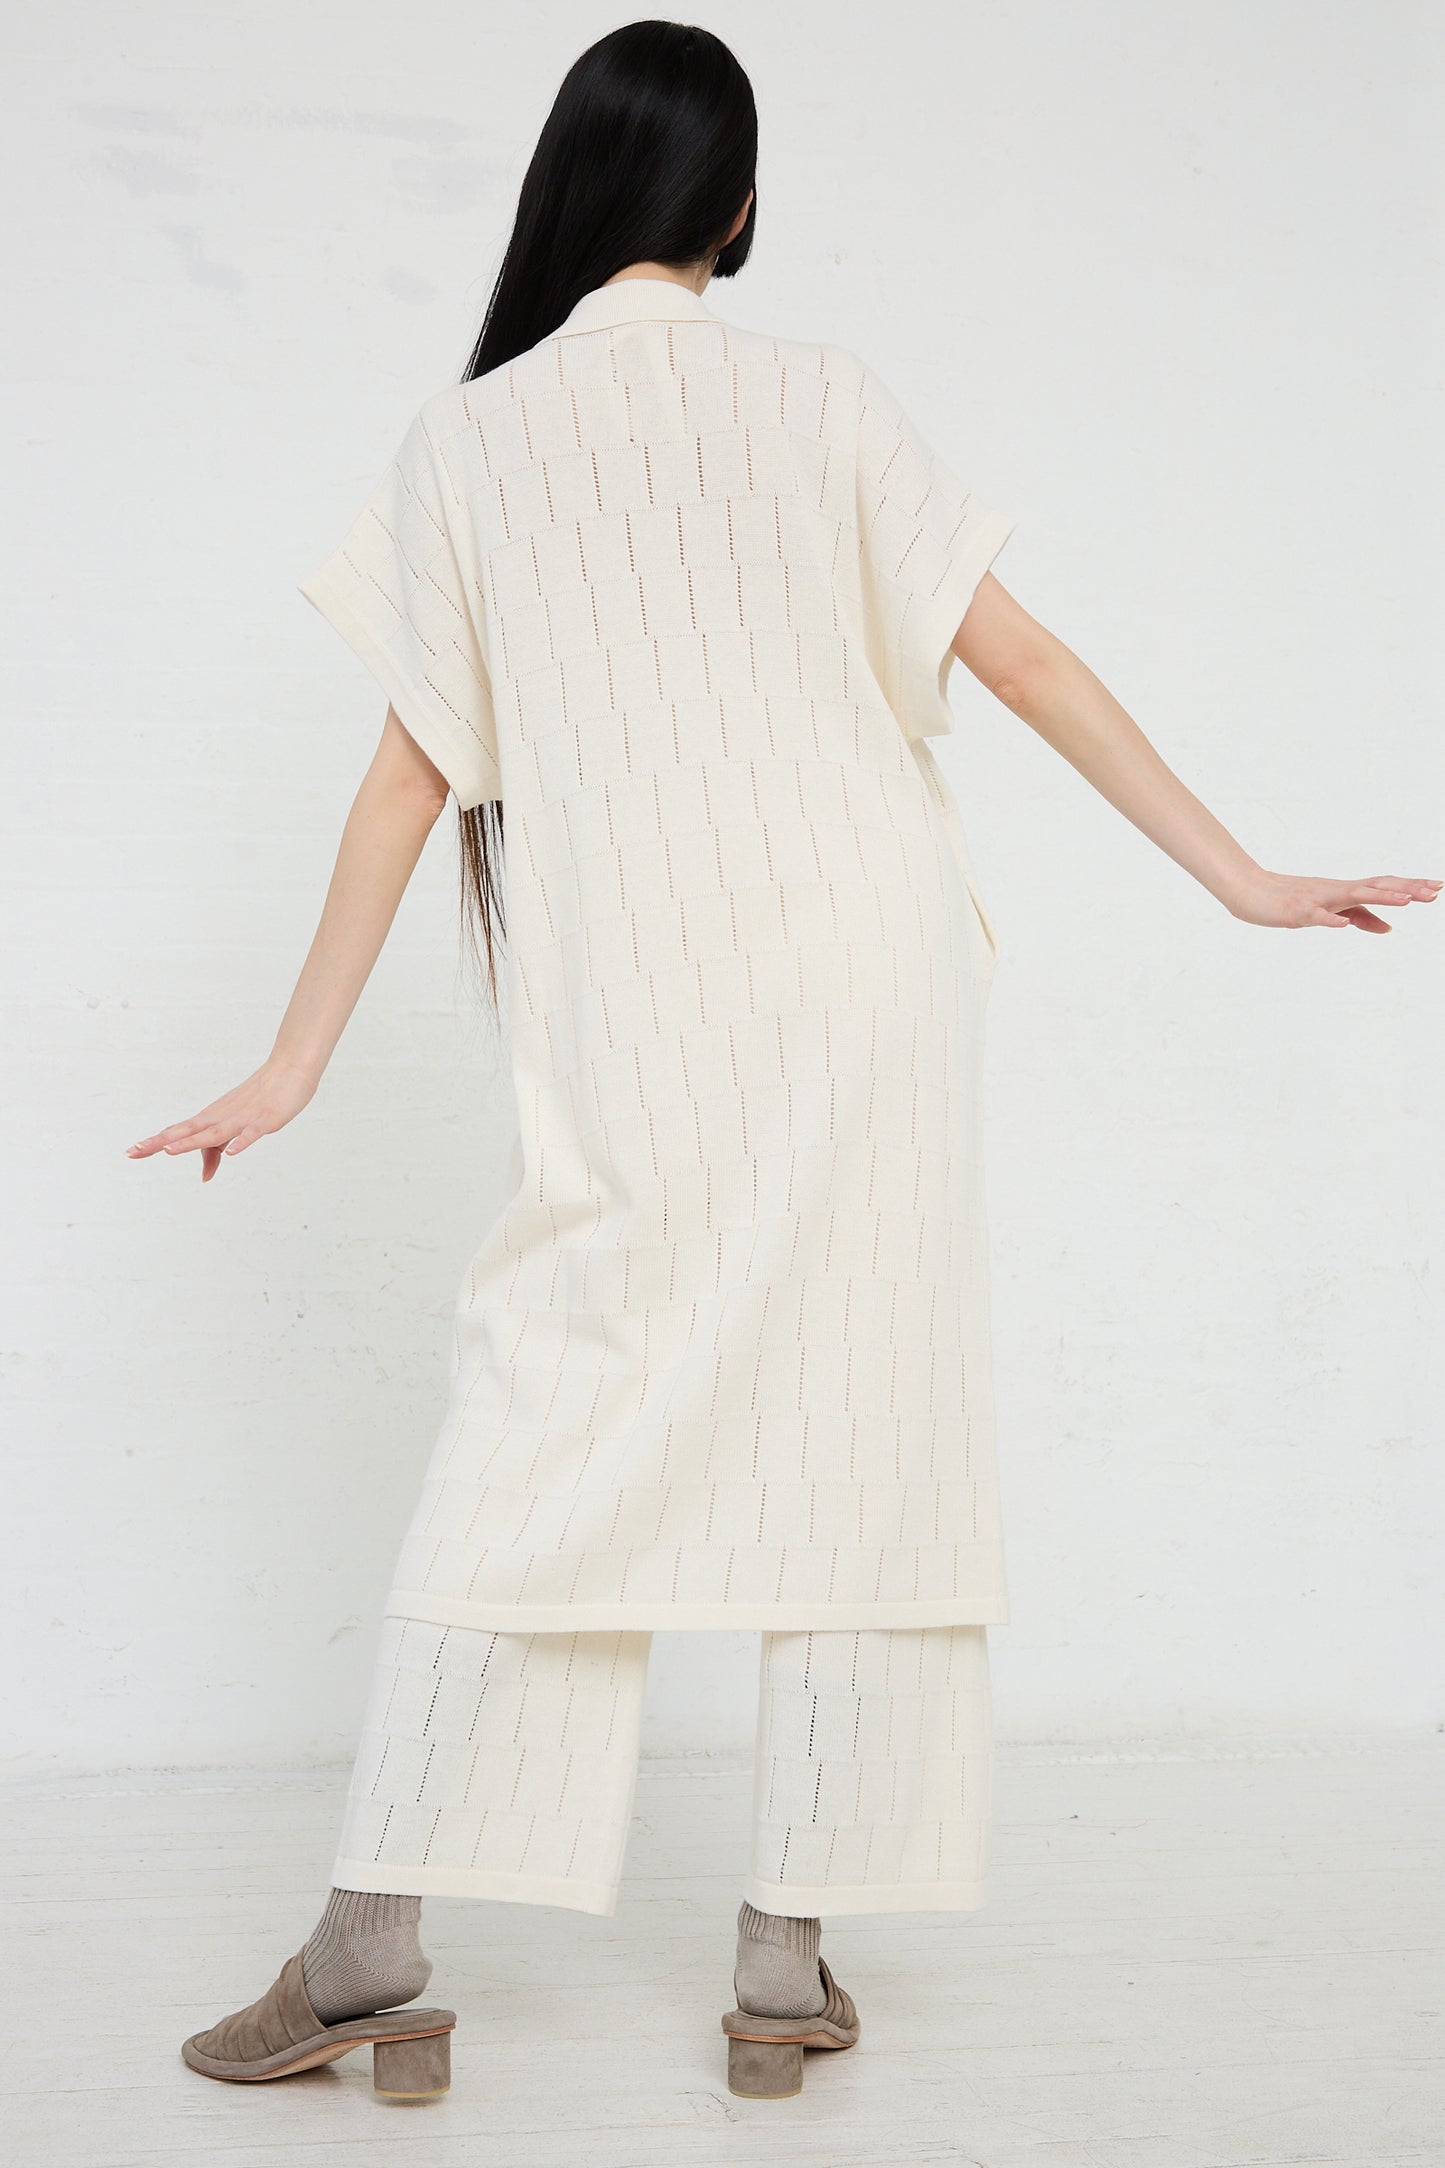 A person facing away from the camera models a Lattice Shirt Dress in Bone by Lauren Manoogian, with trousers and a matching linen blend top.